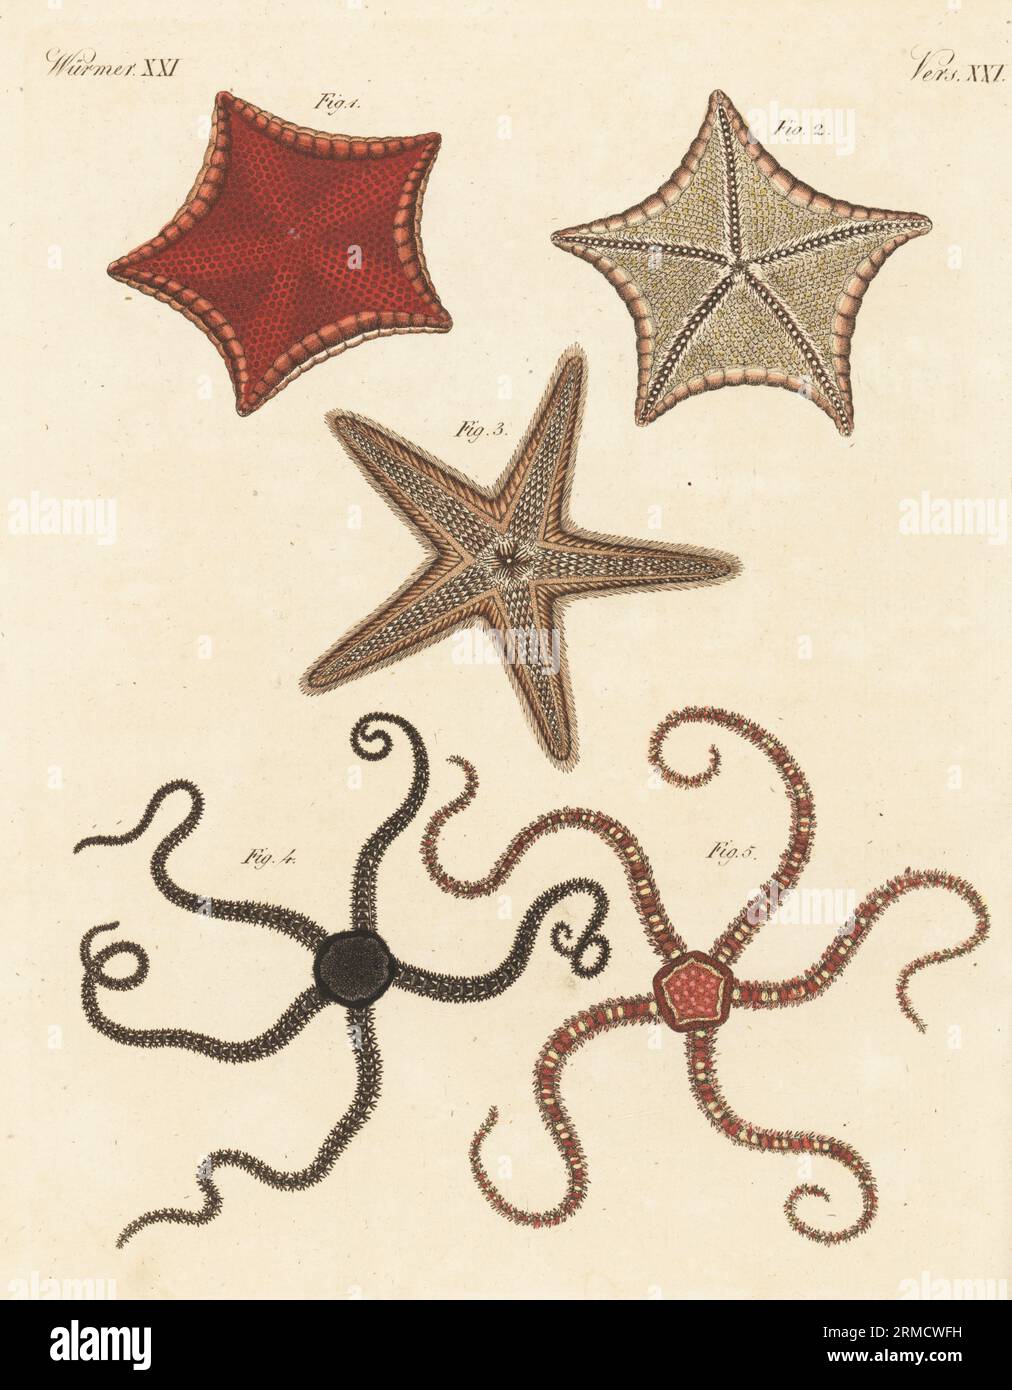 Cushion star, Ceramaster granularis 1,2, red comb star, Astropecten aranciacus 3, black brittle star, Ophiocomina nigra 4, and crevice brittle star, Ophiopholis aculeata 5. Handcoloured copperplate engraving from Carl Bertuch's Bilderbuch fur Kinder (Picture Book for Children), Weimar, 1815. A 12-volume encyclopedia for children illustrated with almost 1,200 engraved plates on natural history, science, costume, mythology, etc., published from 1790-1830. Stock Photo